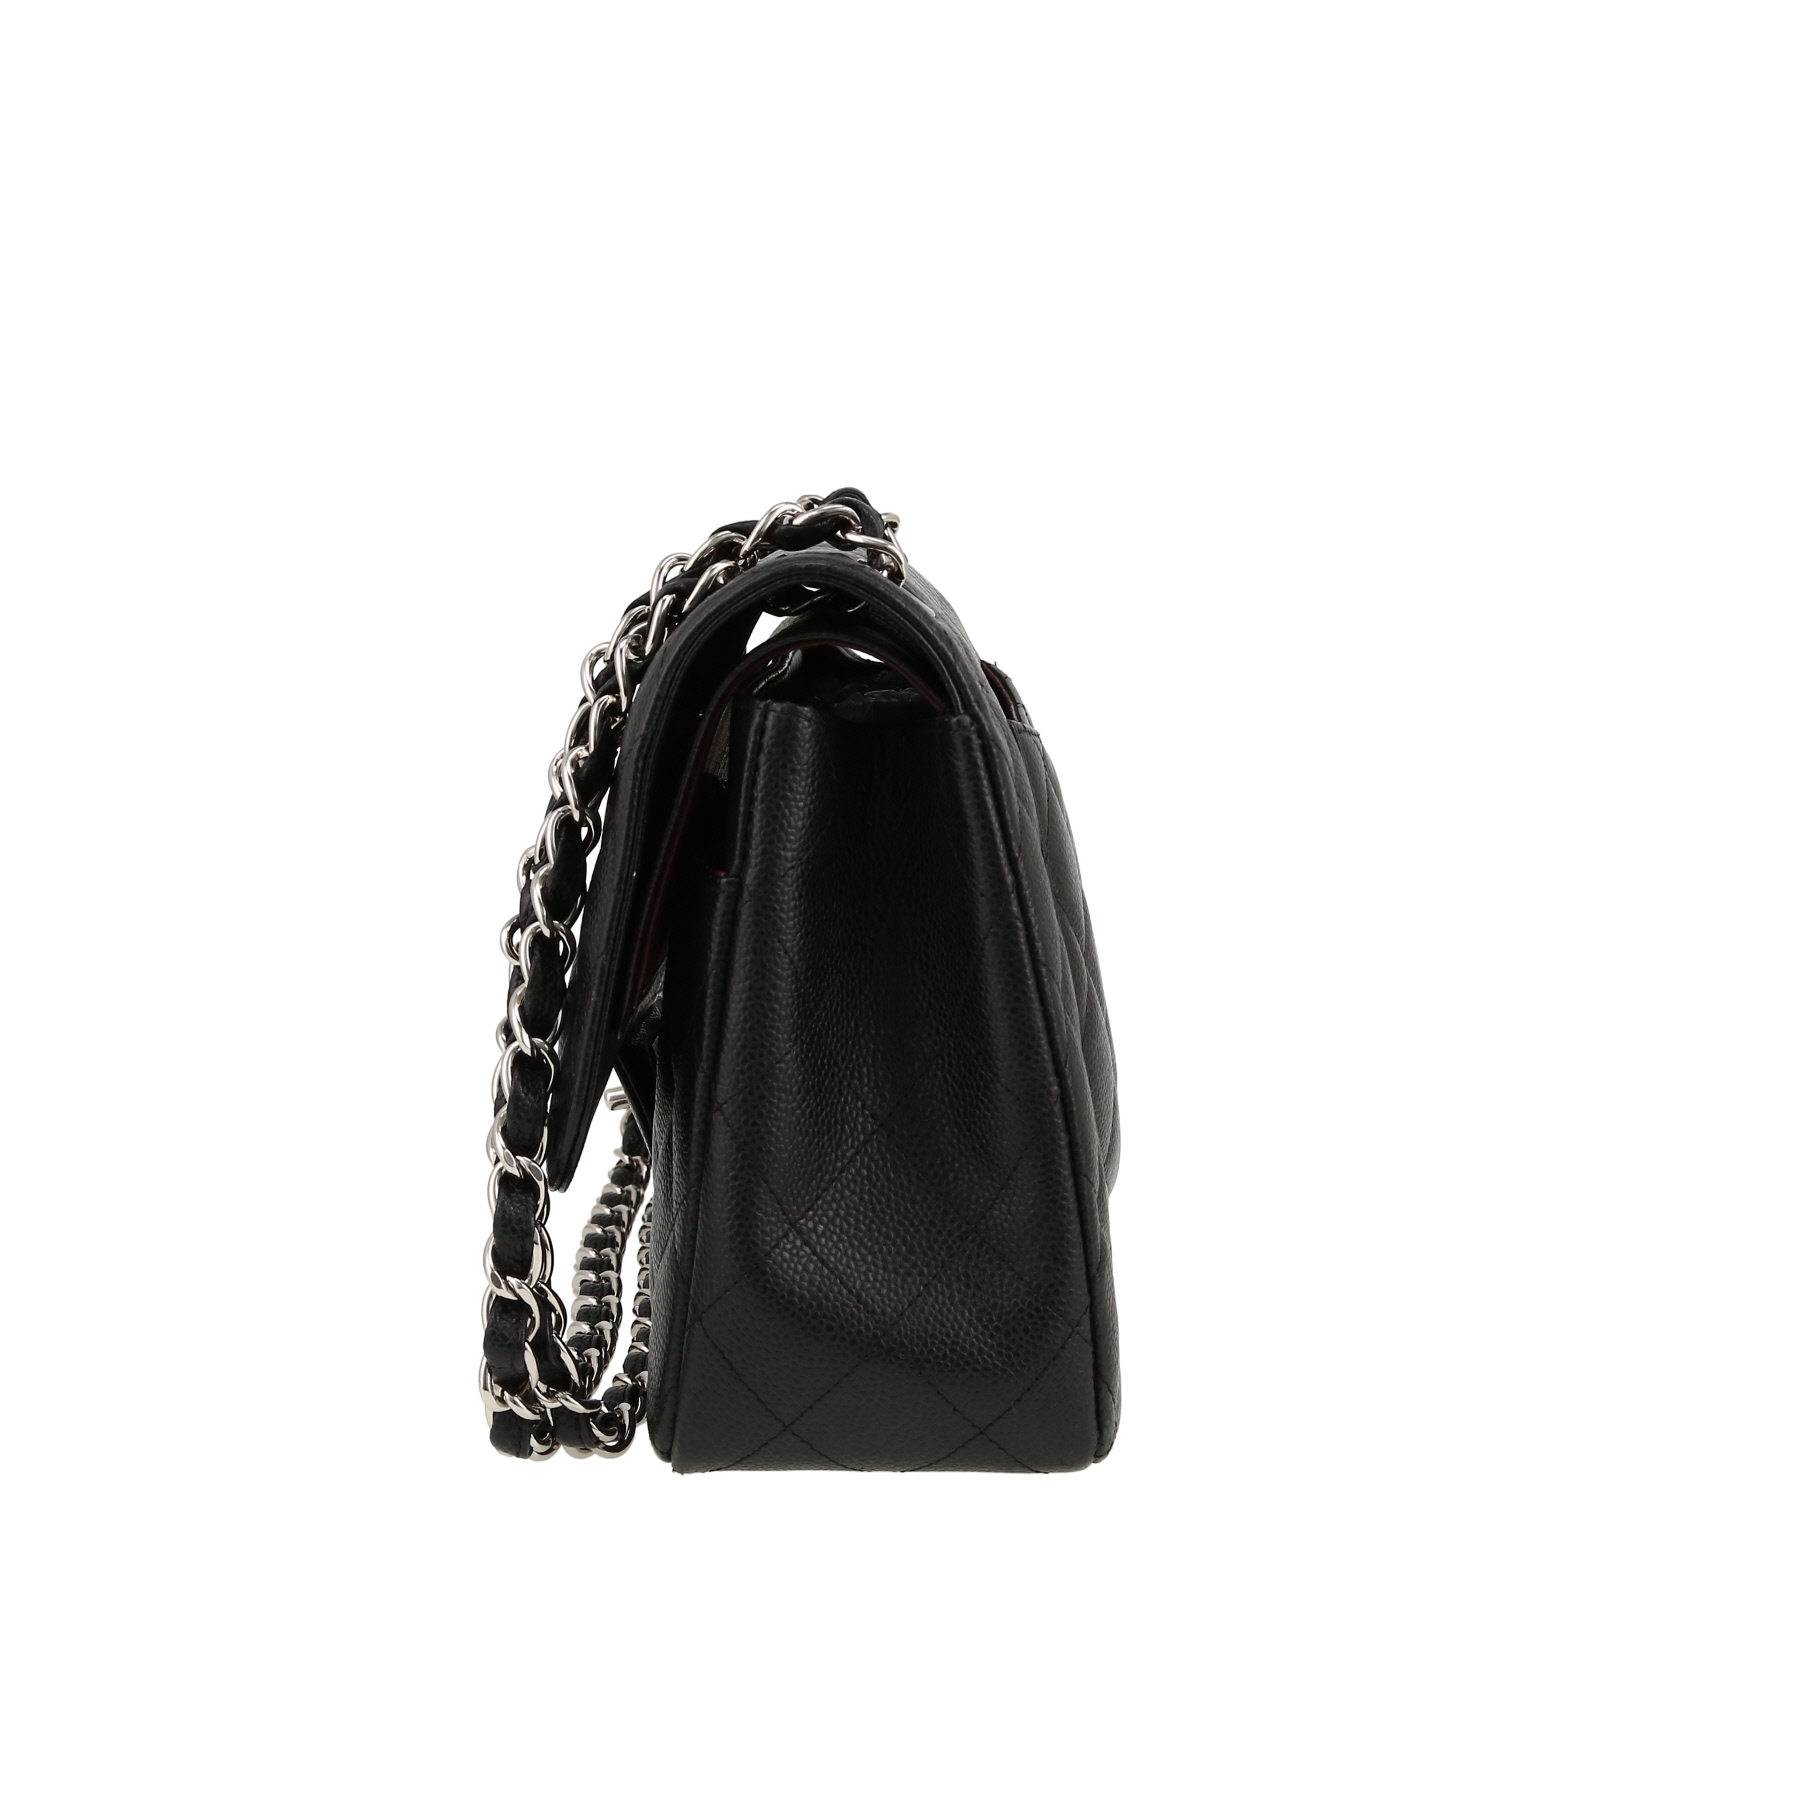 Timeless Jumbo Handbag In Black Quilted Grained Leather